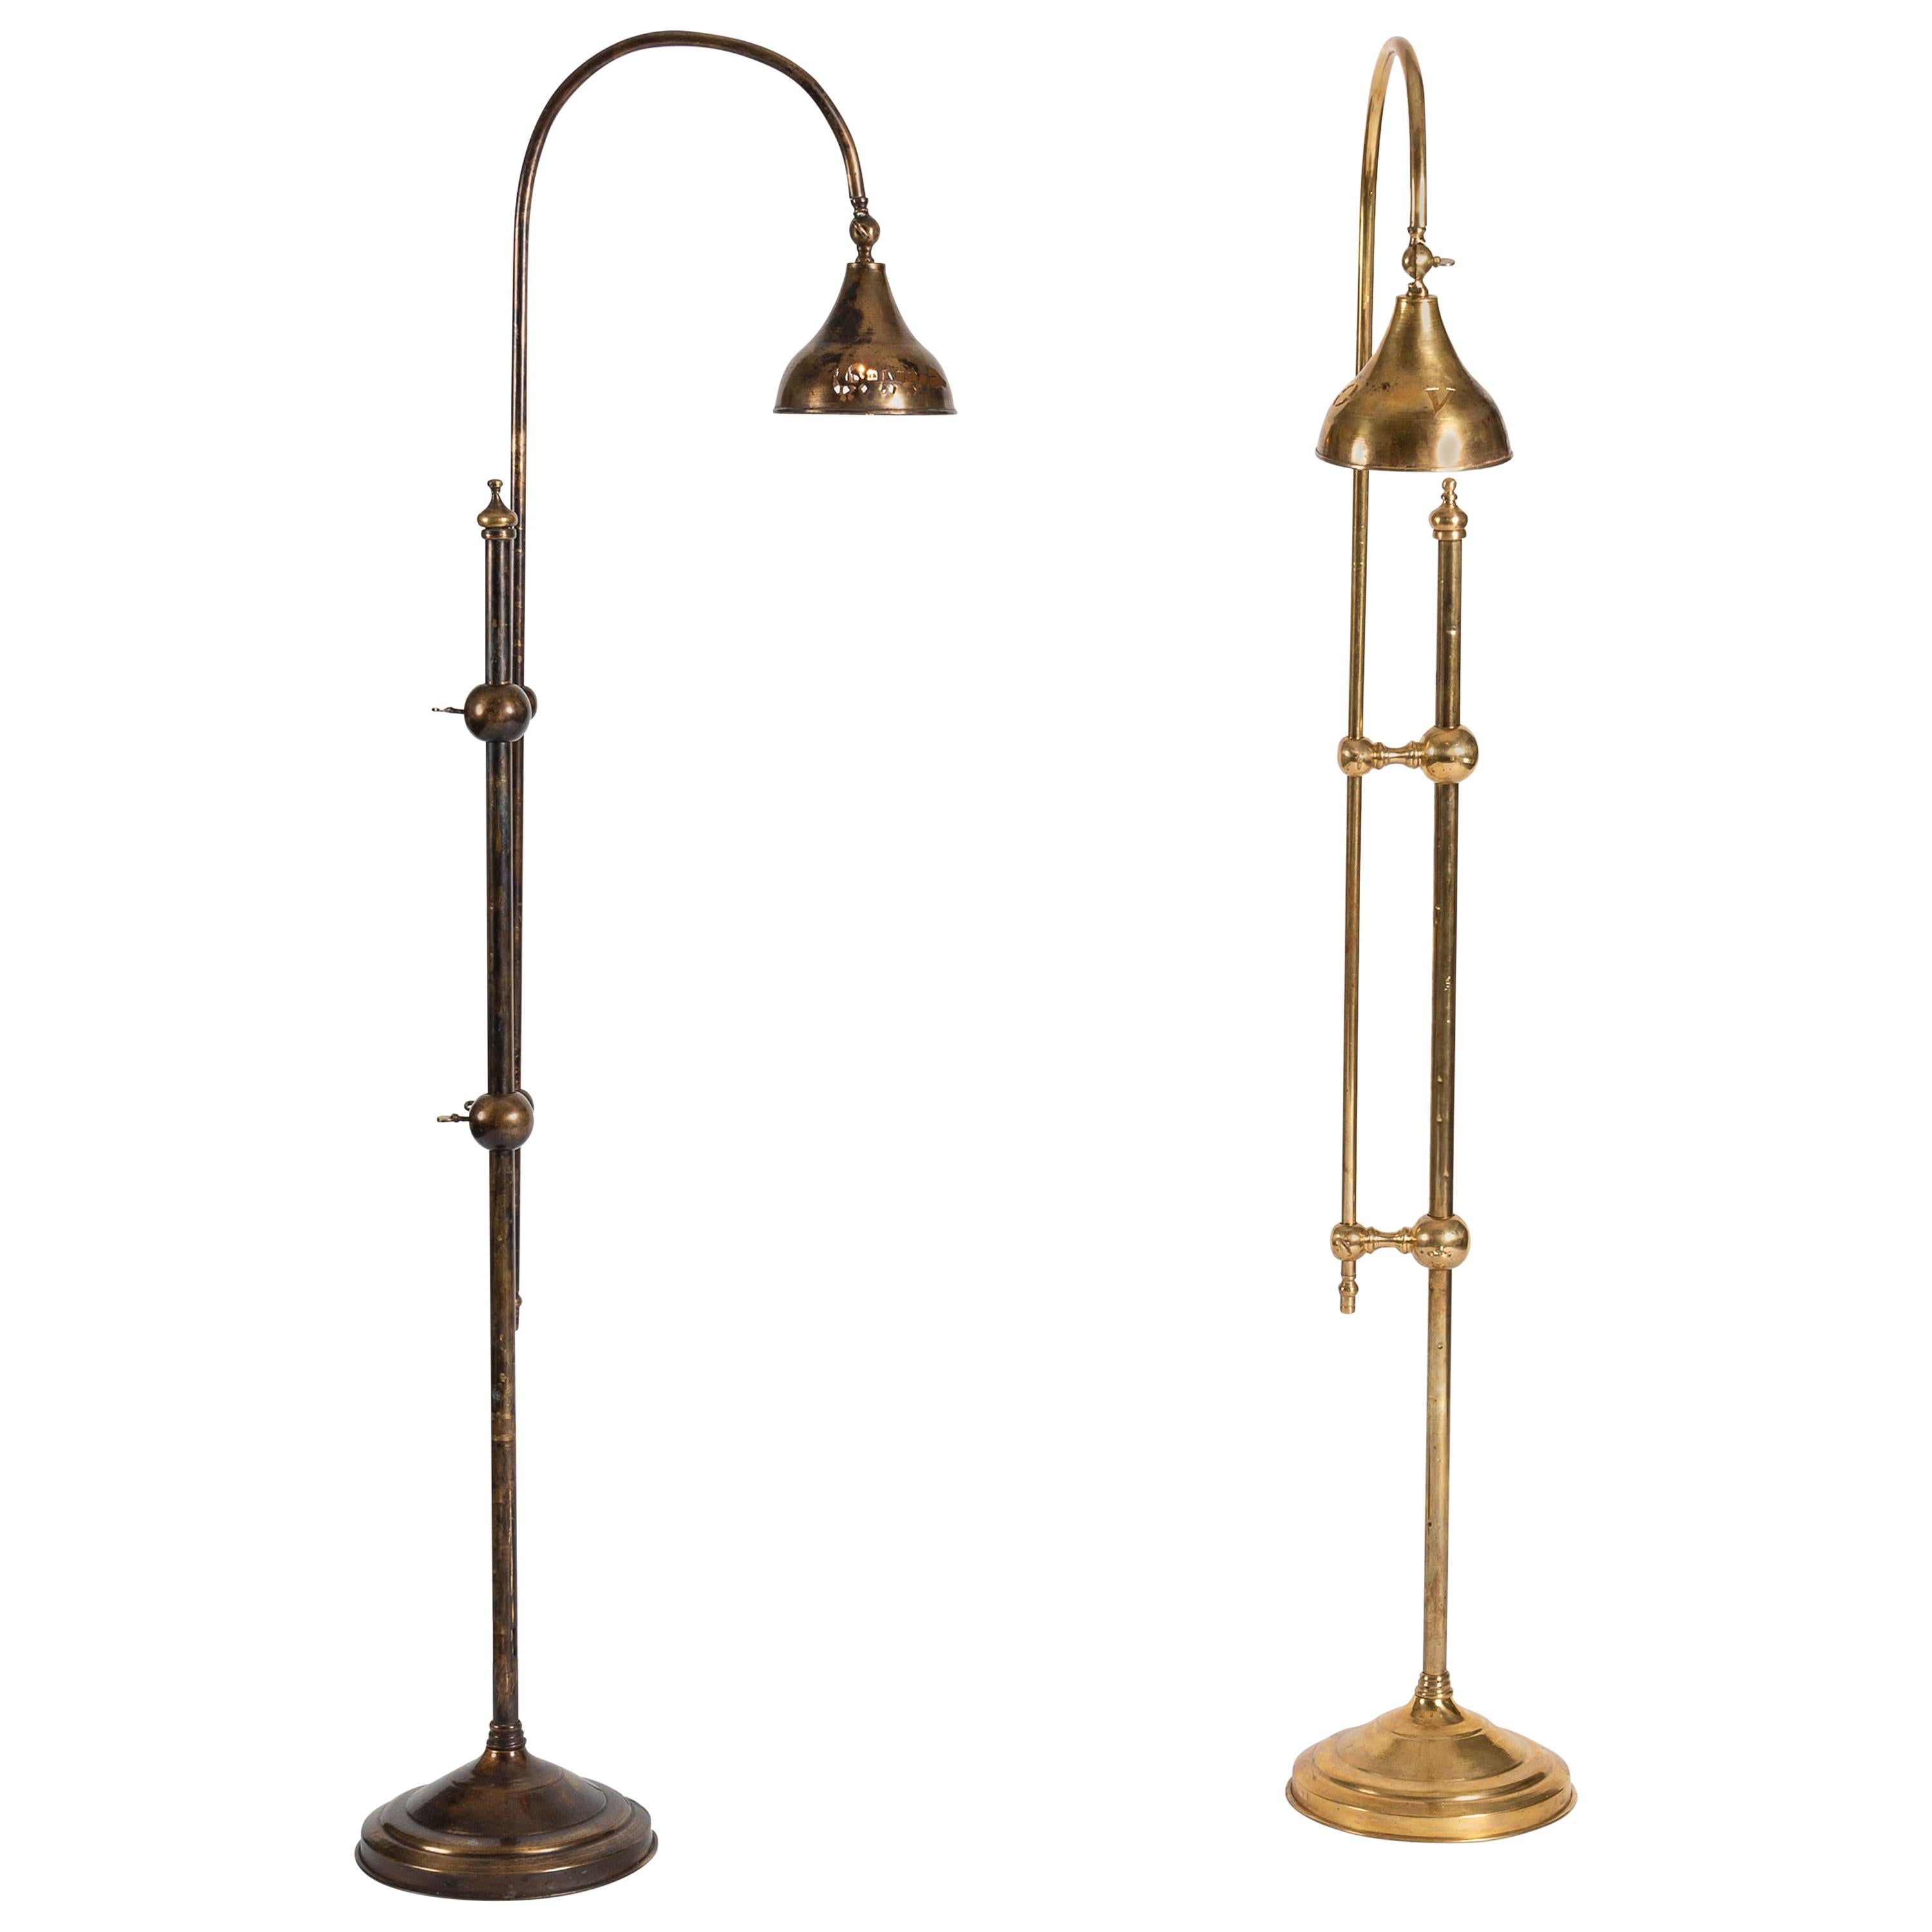 Bill Willis, Matched Pair of Articulated Floor Lamps, Morocco, Late 20th Century For Sale